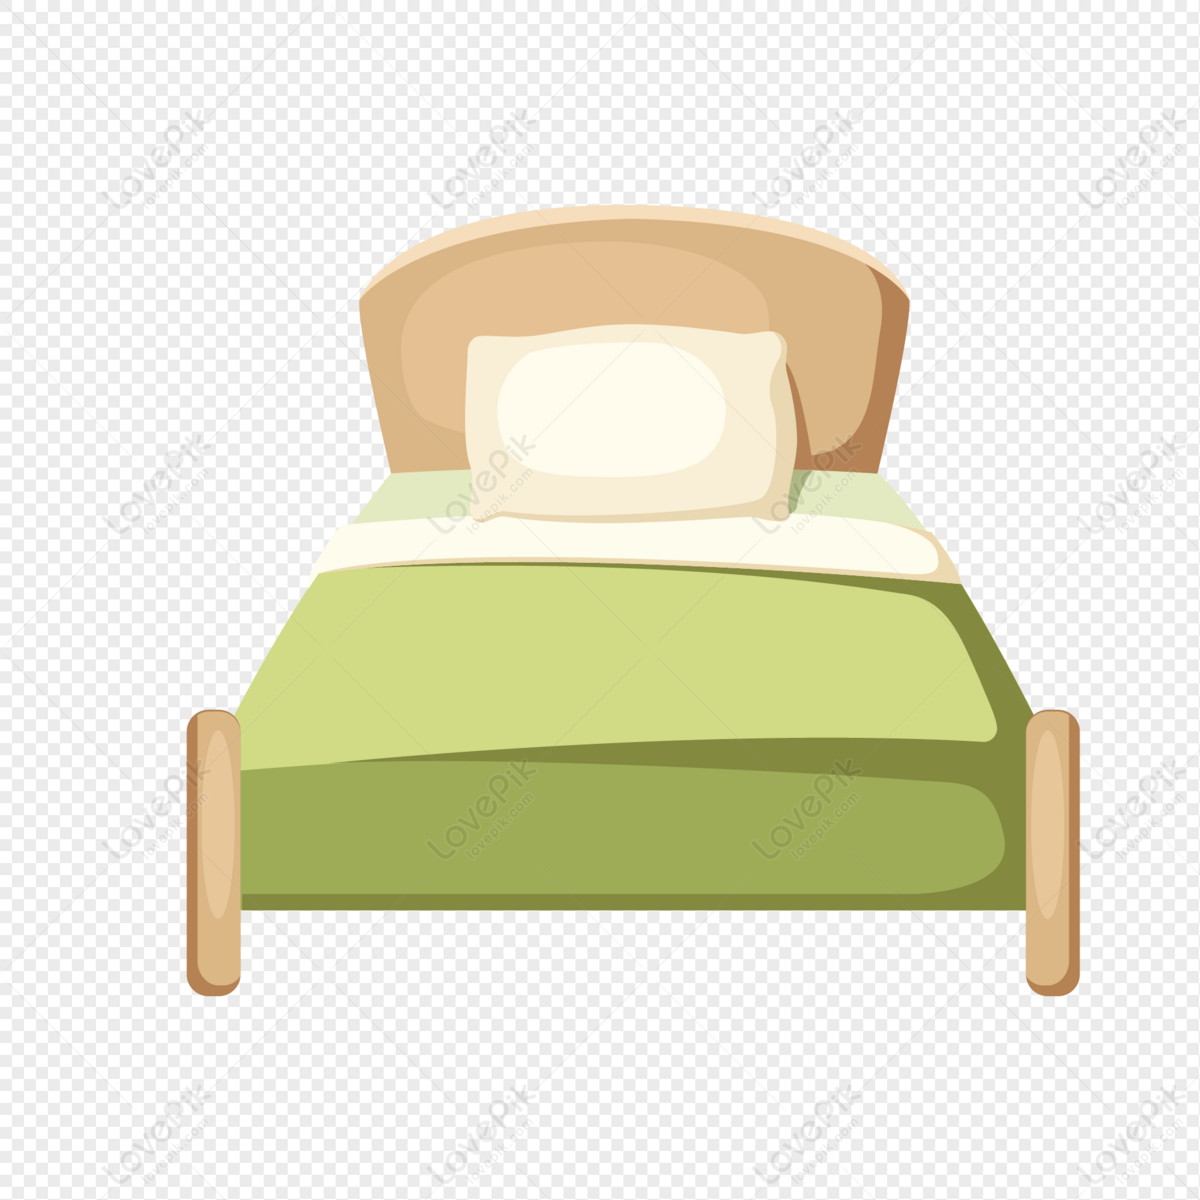 Bed PNG White Transparent And Clipart Image For Free Download - Lovepik |  401704792